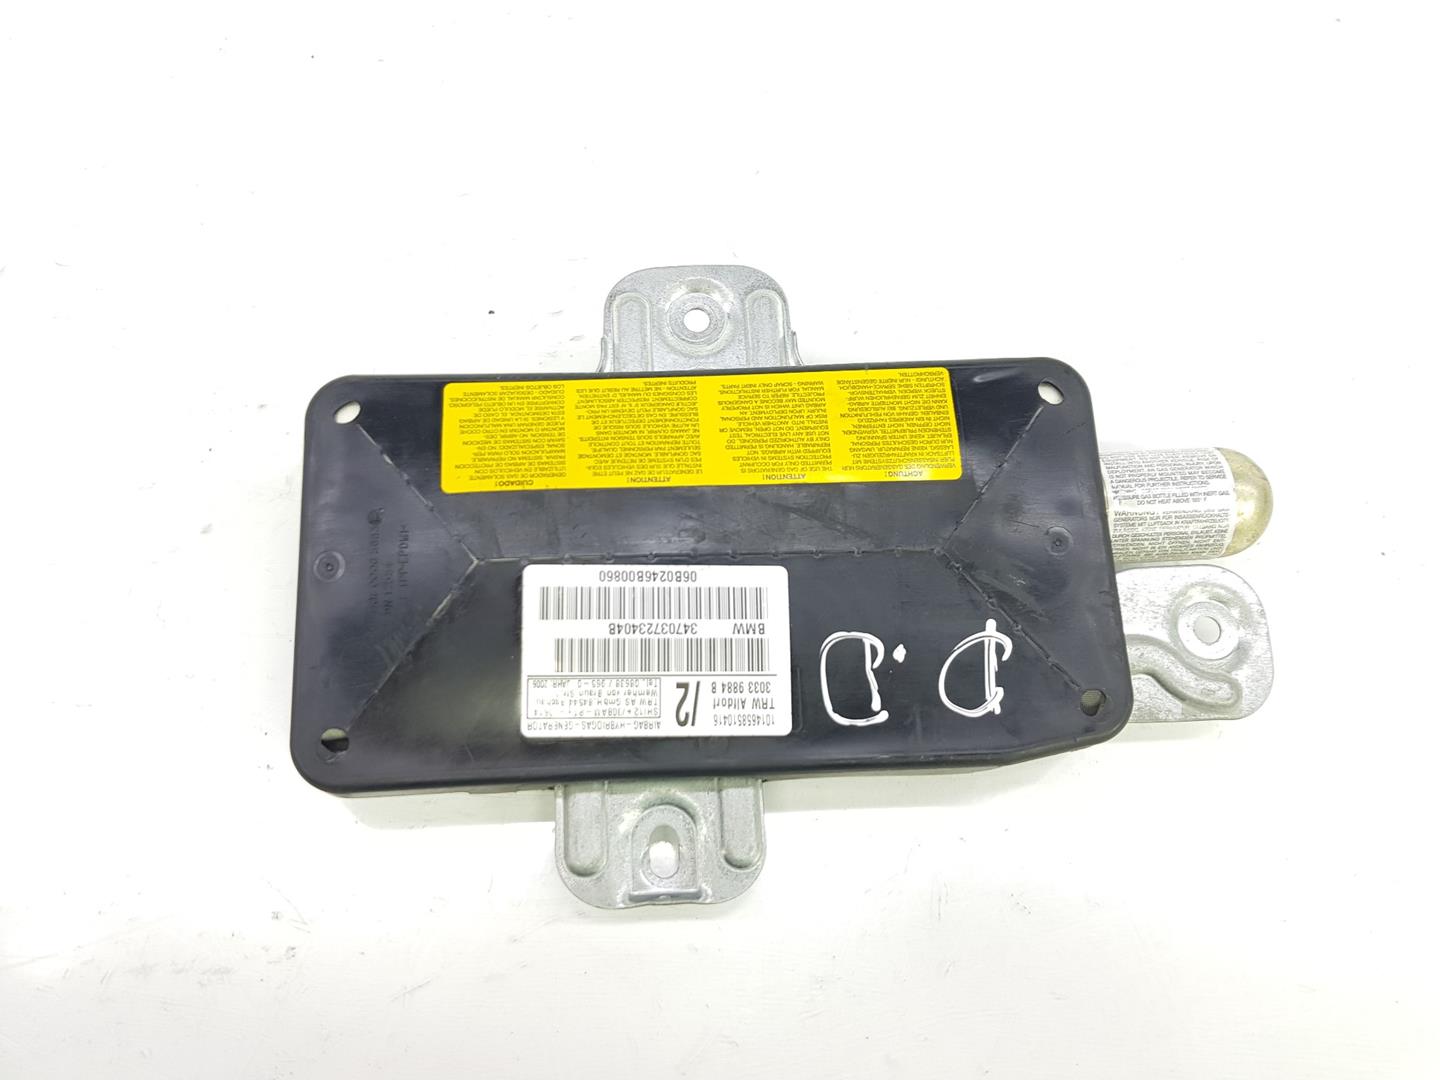 BMW X5 E53 (1999-2006) Front Right Door Airbag SRS 72127037234, 7037234 19859399